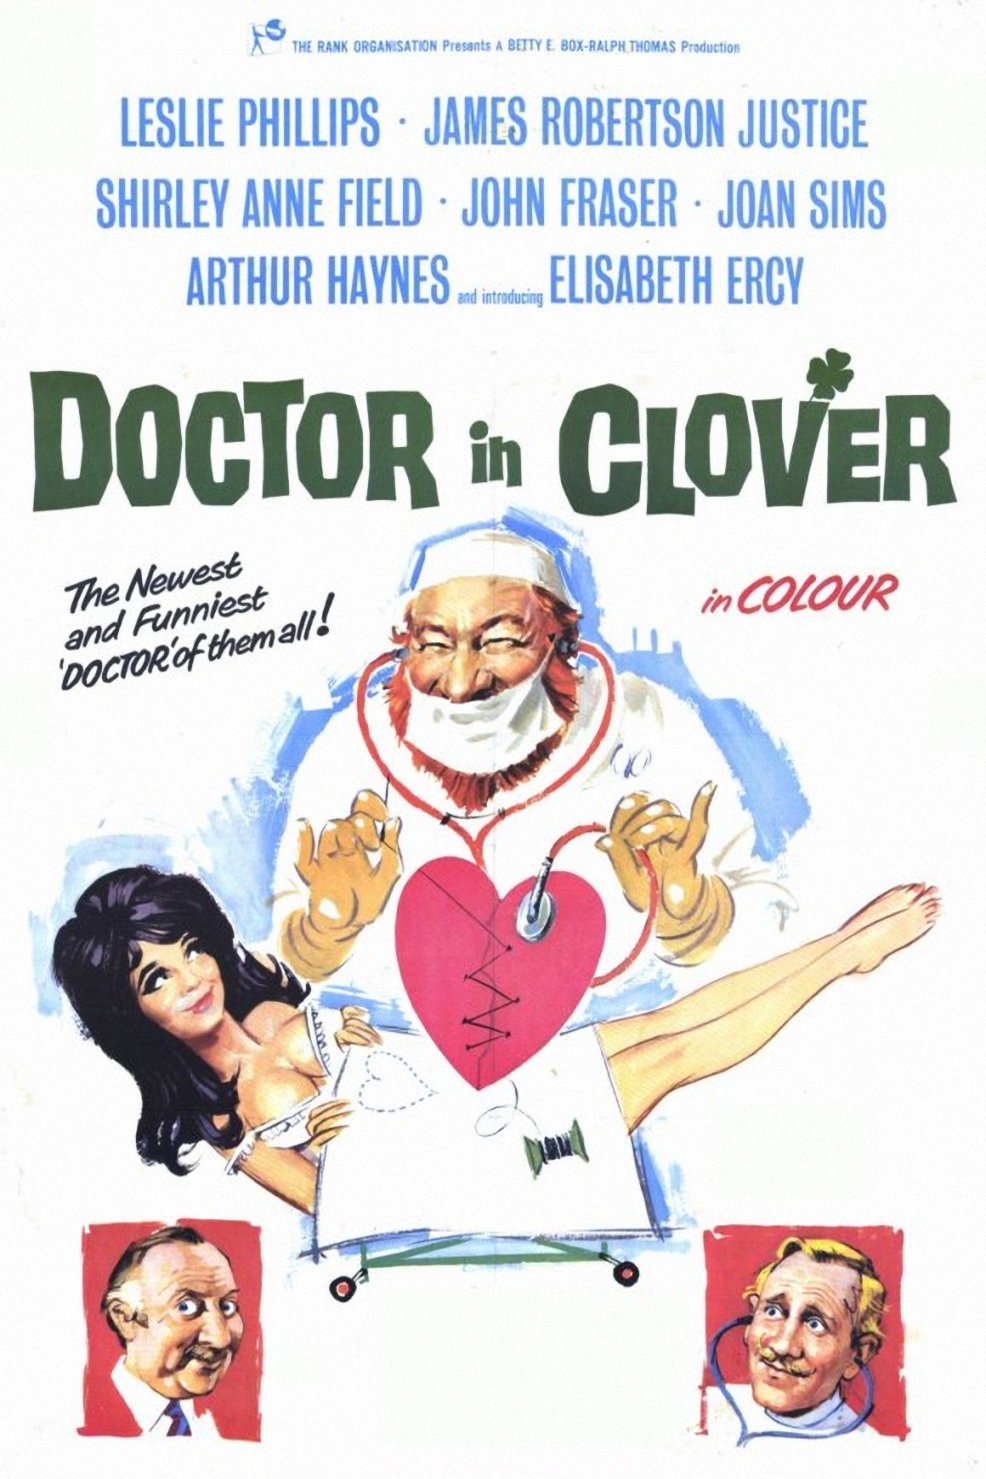 Poster of the movie Doctor in Clover